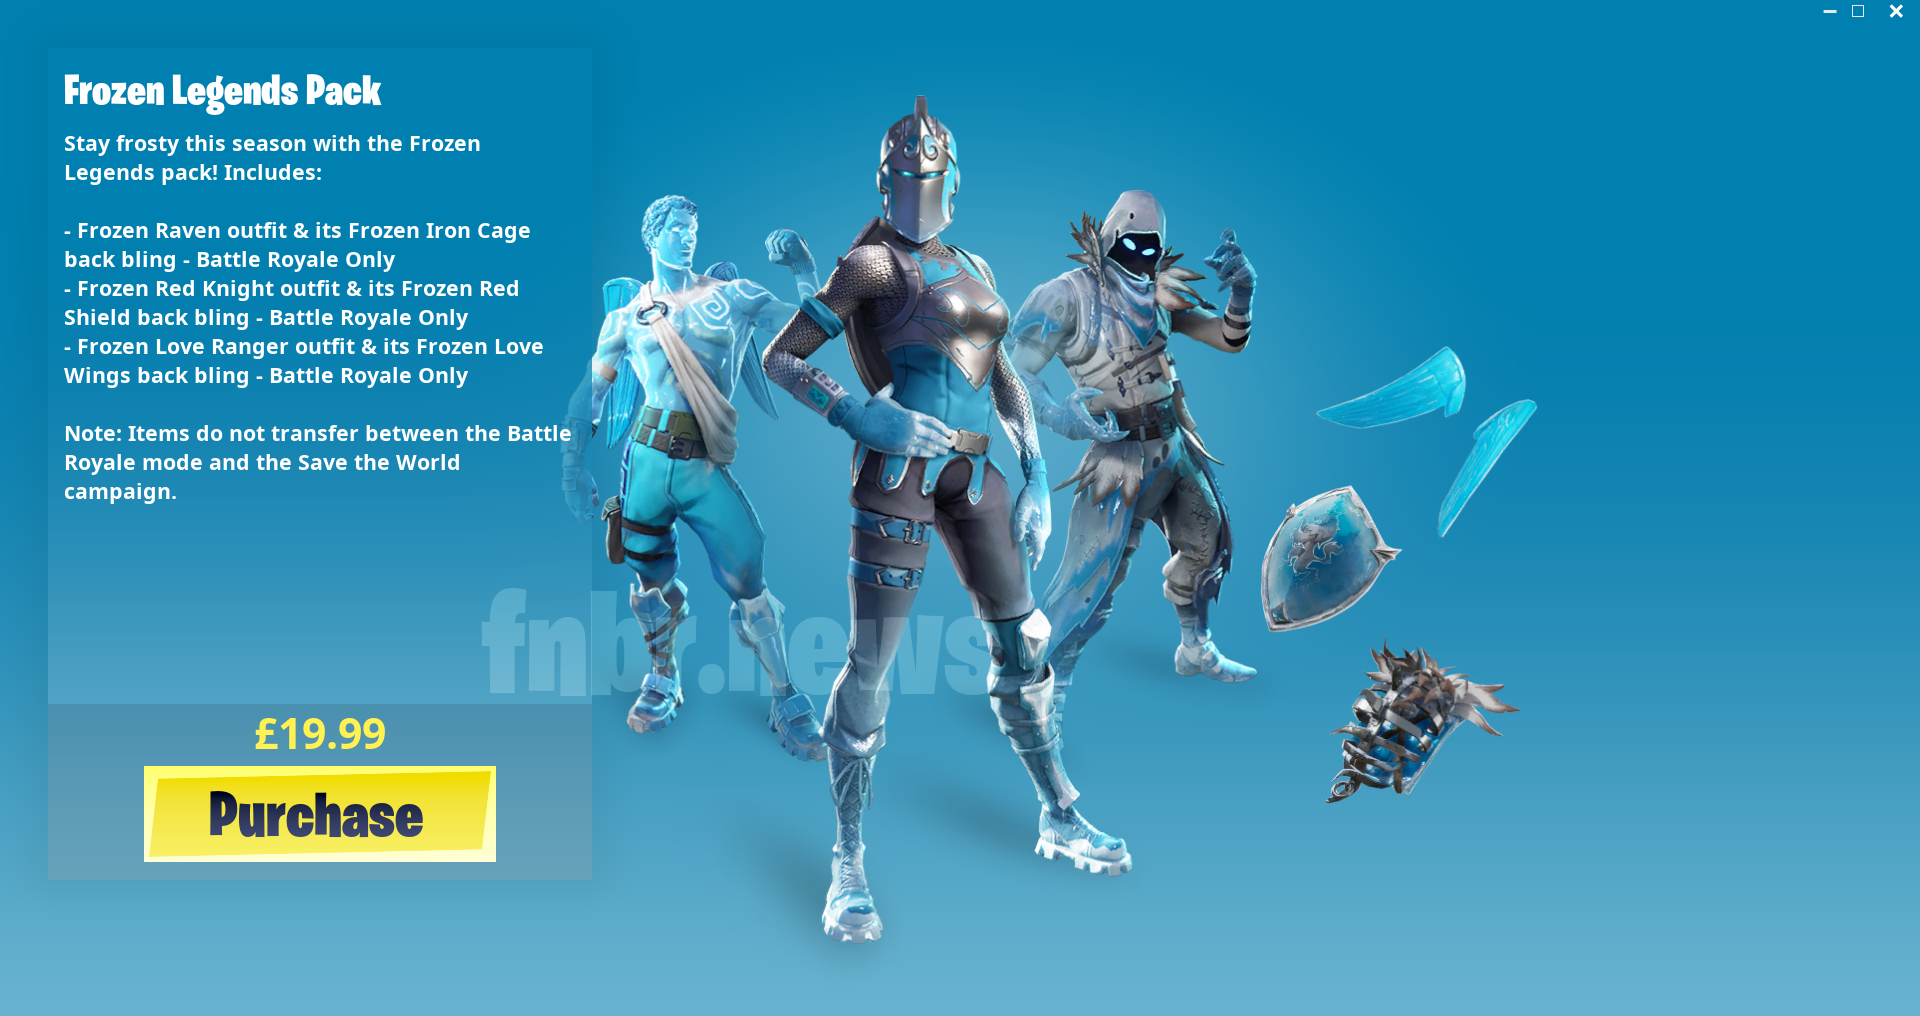 Leak: Frozen Legends Pack Coming to Fortnite on December 24th, Costs $25